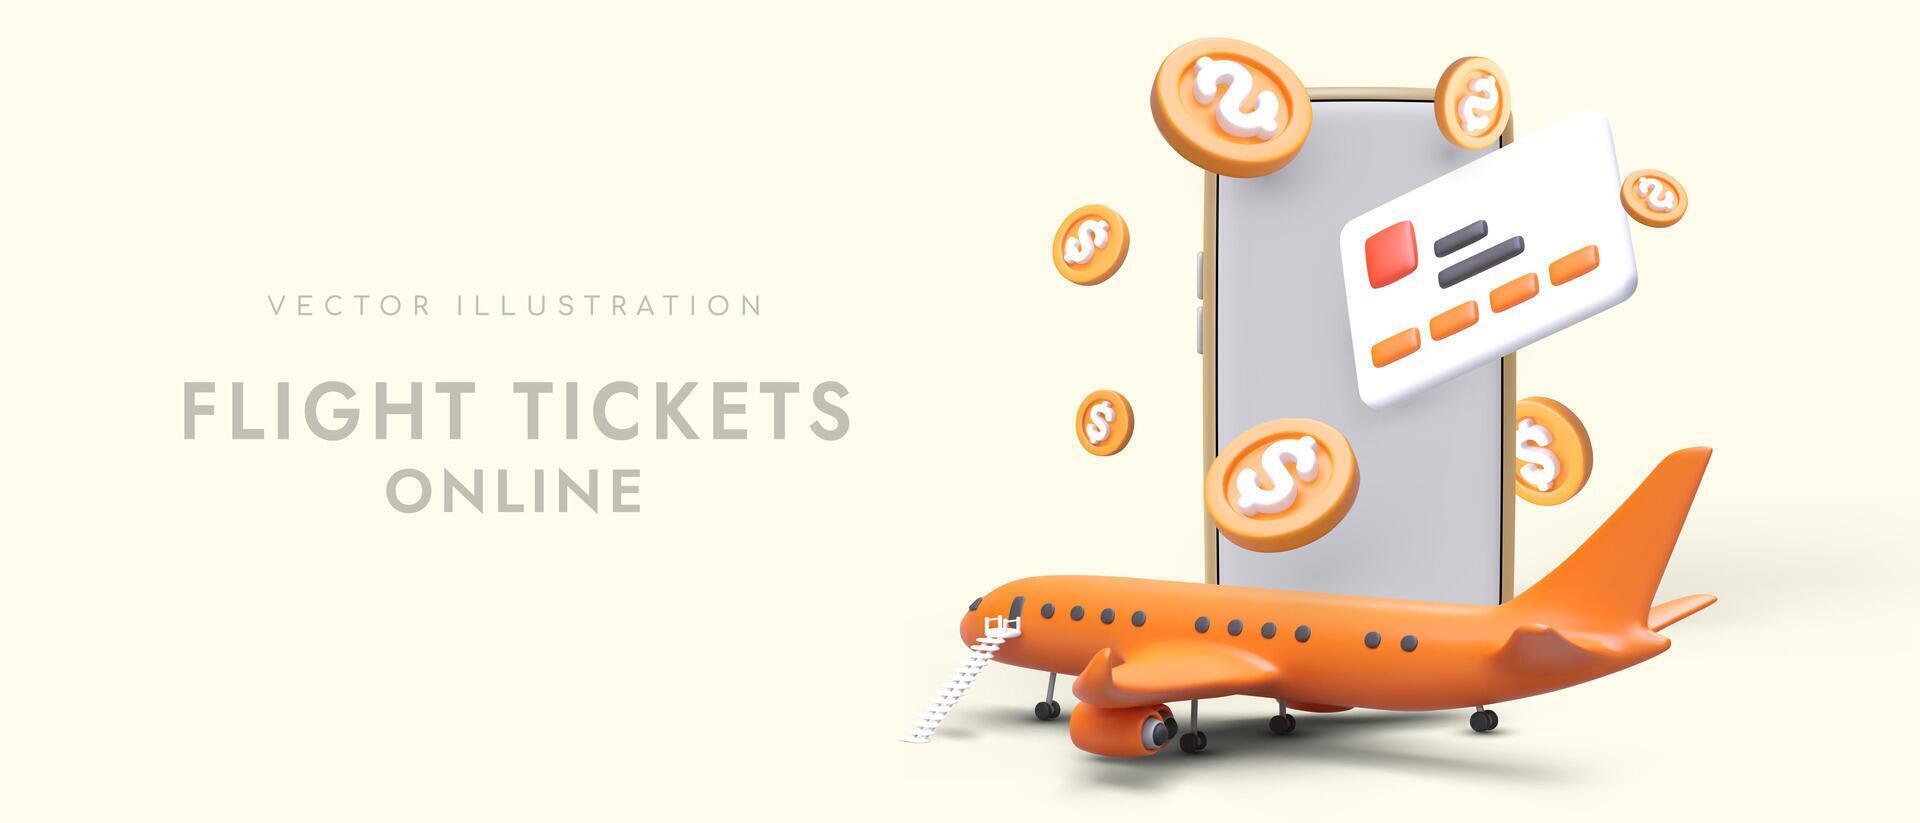 Realistic cartoon airplane, big smartphone and credit card. Paying online, buying airplane tickets vector